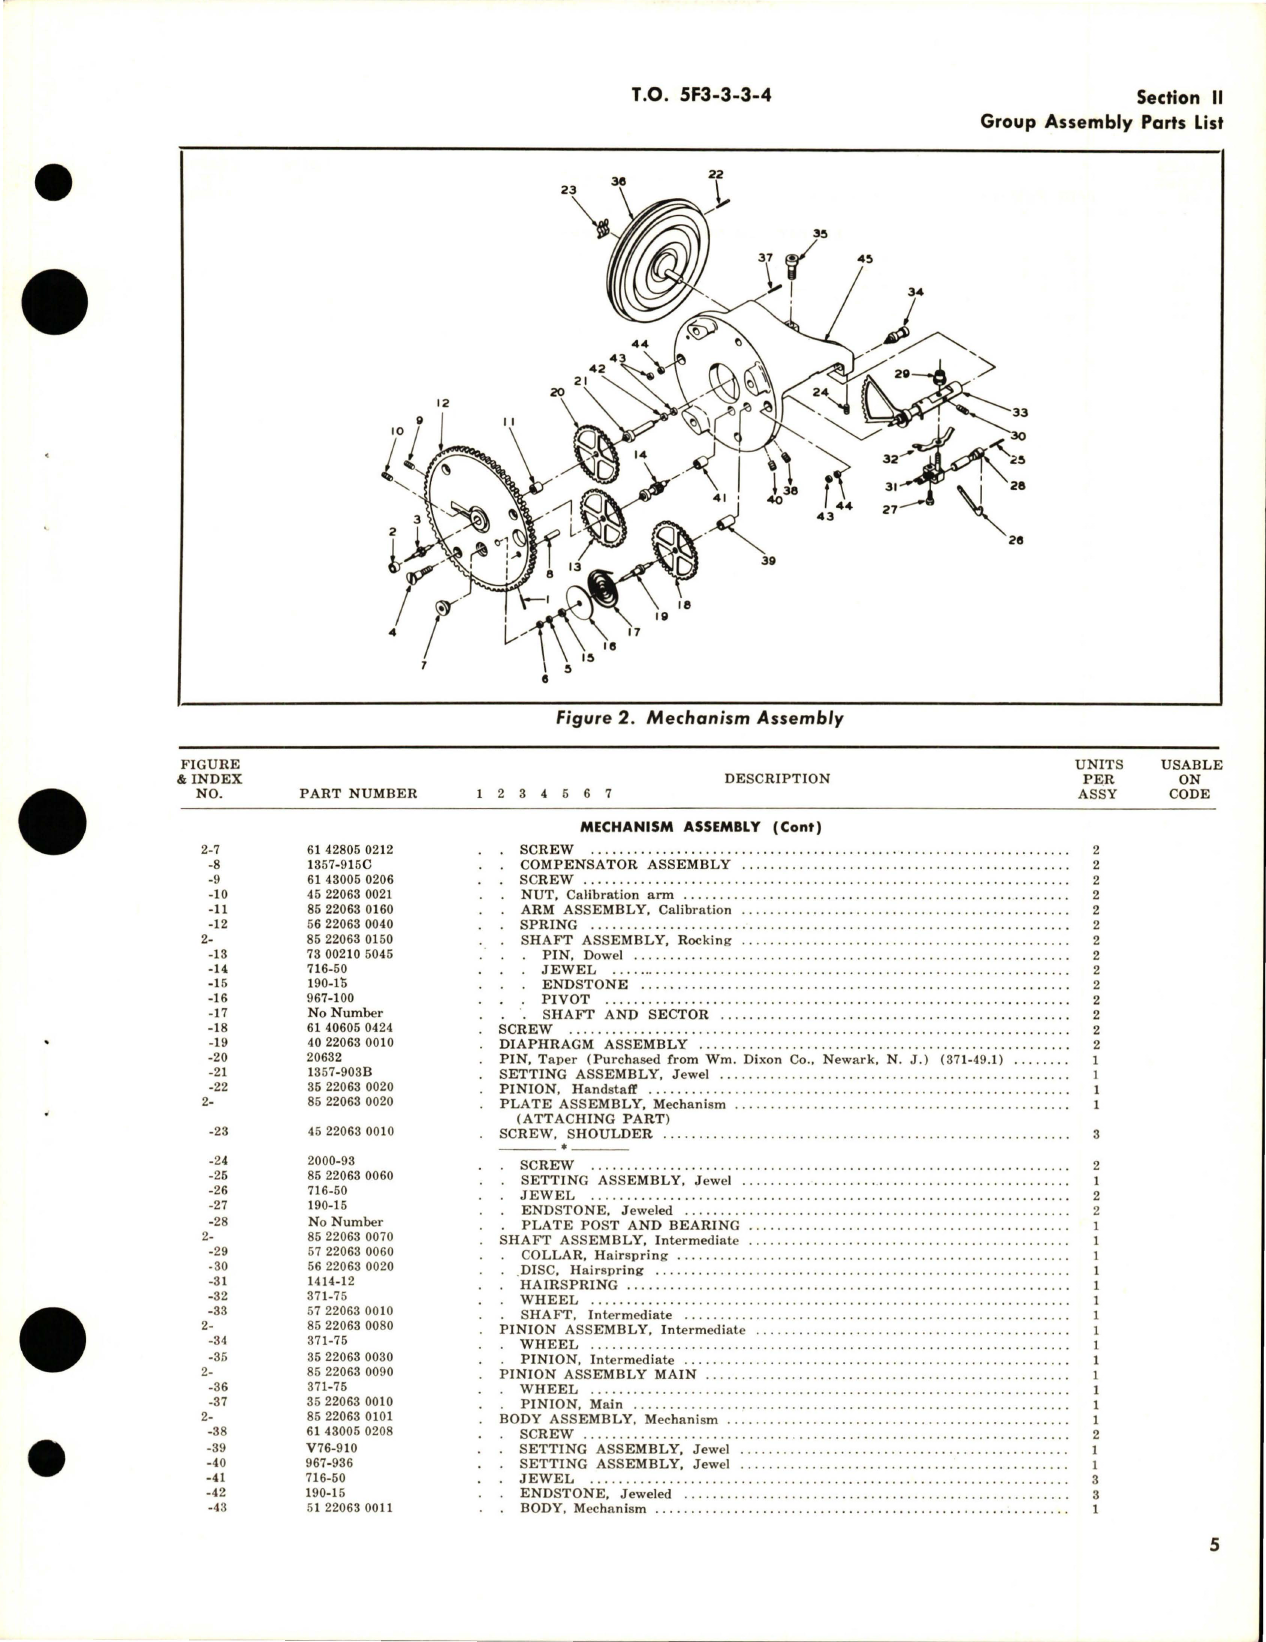 Sample page 5 from AirCorps Library document: Illustrated Parts Breakdown for Pressure Sensitive Altimeter - Parts D22061 04 004 and D22061 04 010